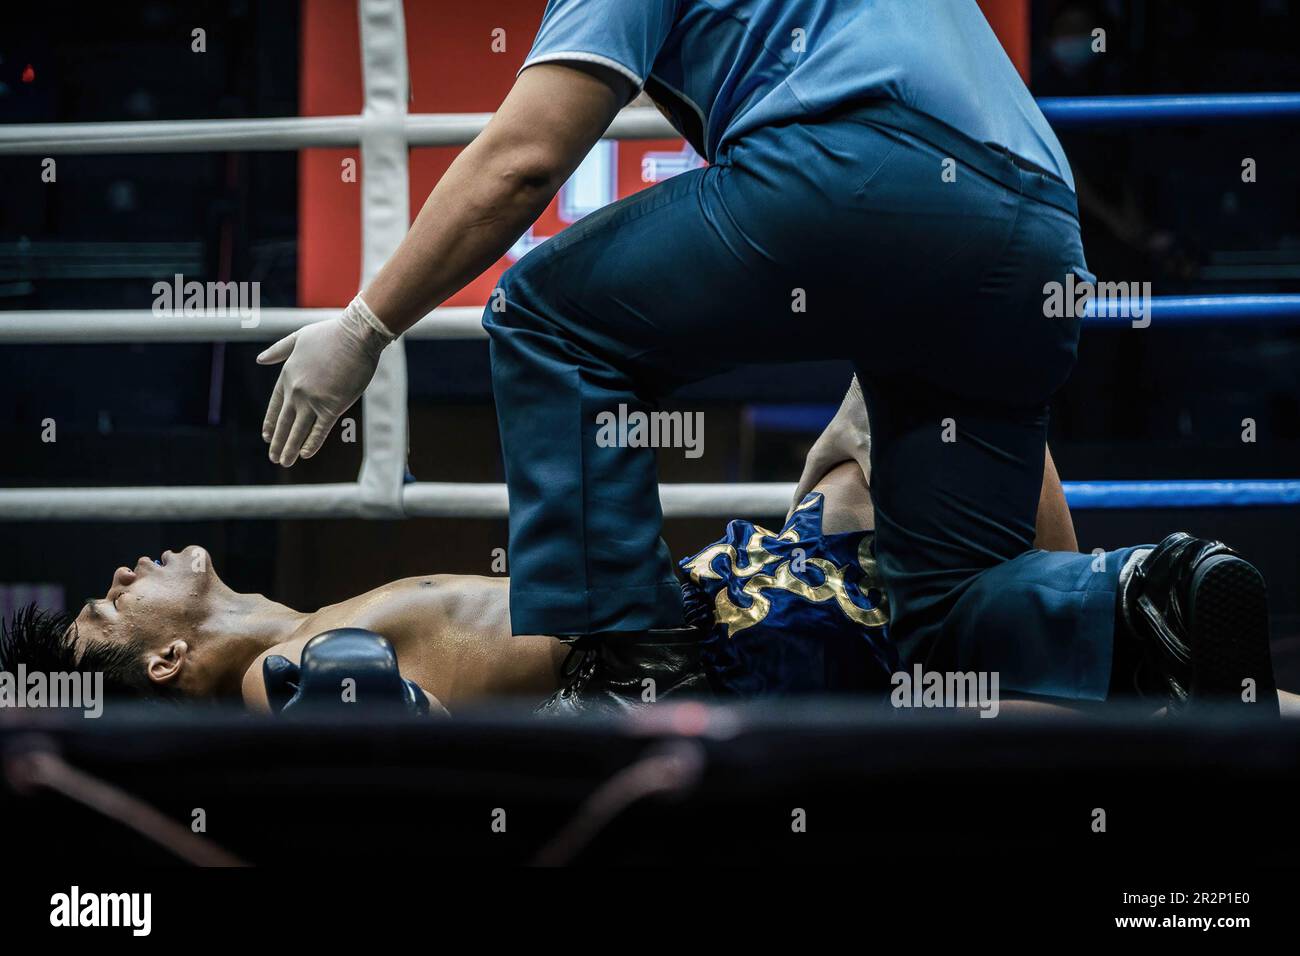 A referee is seen counting out after a Muay Thai boxer is knocked down, at Bangkok's Rajadamnern stadium. Muay Thai fights at Thailand’s iconic boxing Rajadamnern stadium, the dream stage for competitors and it is favourite for combat sports all over the world. Stock Photo